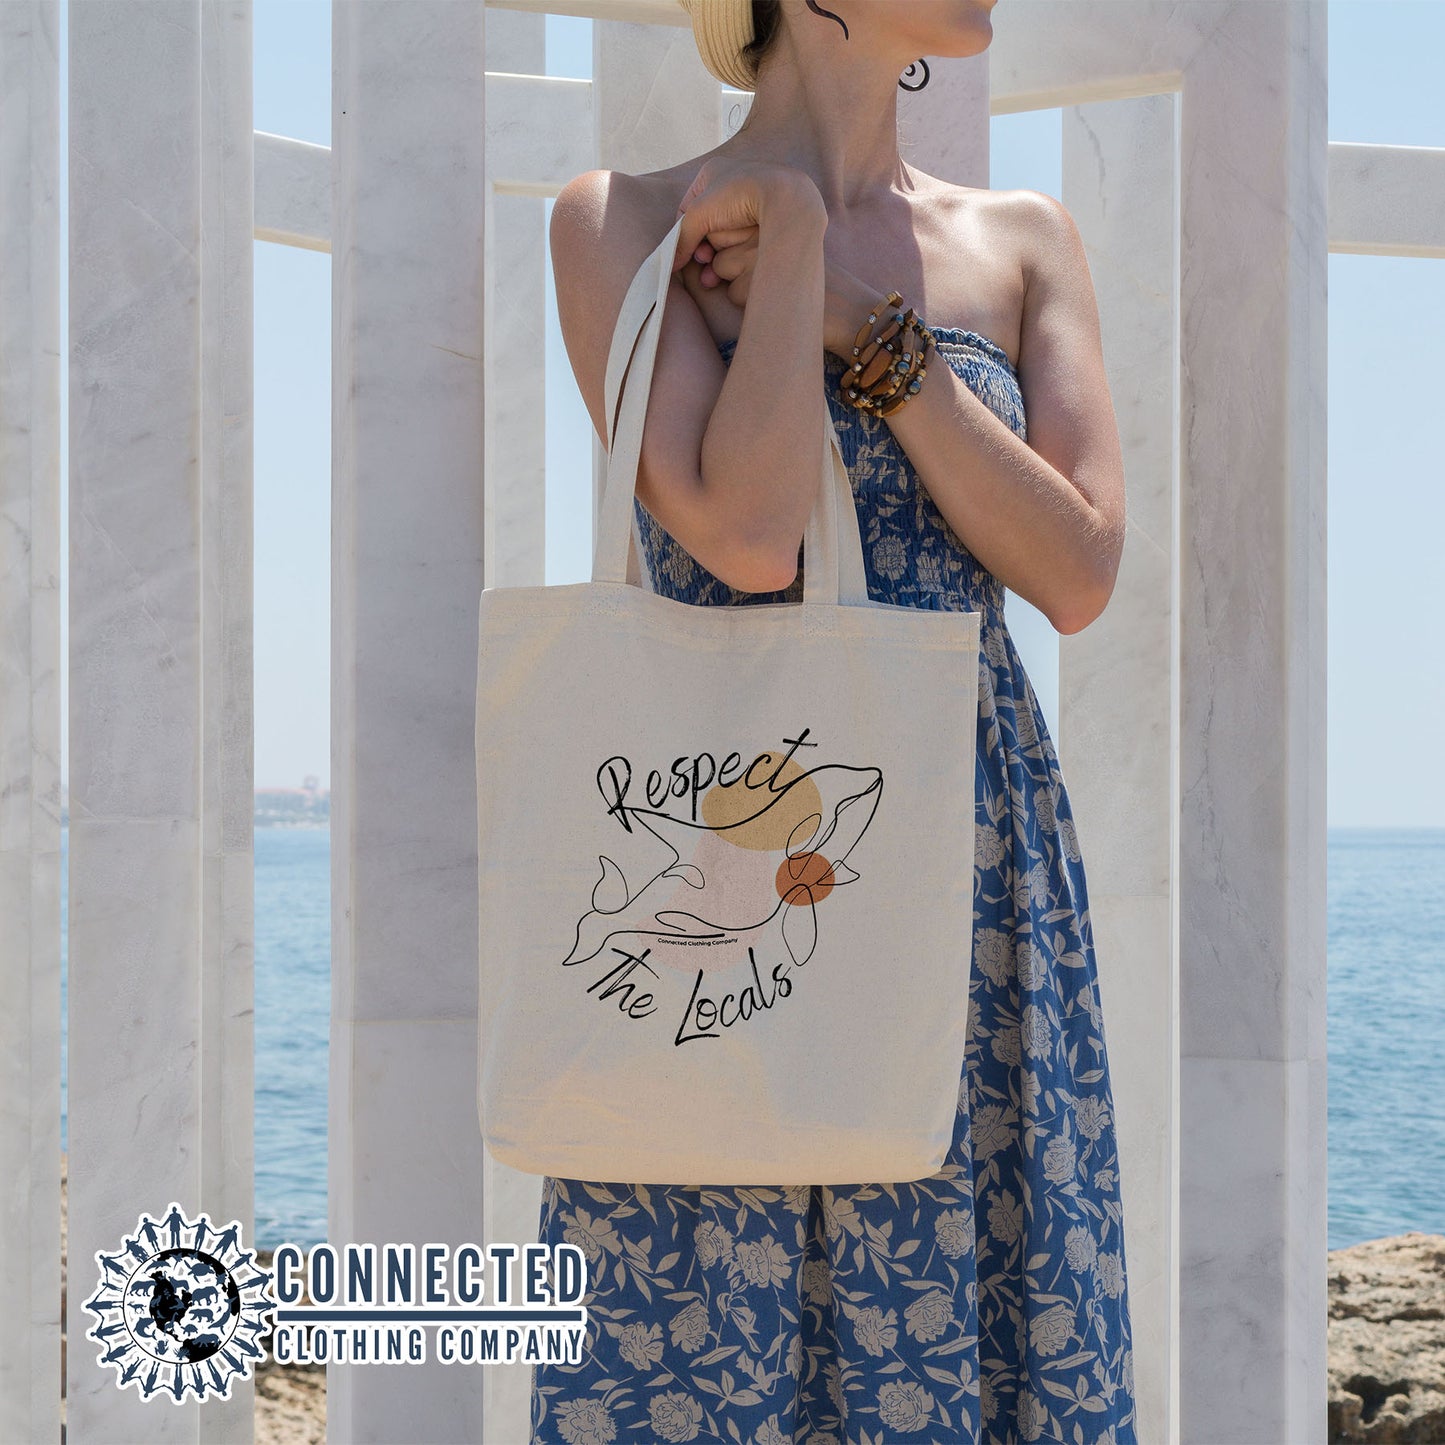 Respect The Locals Orca Tote Bag - architectconstructor - 10% of proceeds donated to killer whale conservation